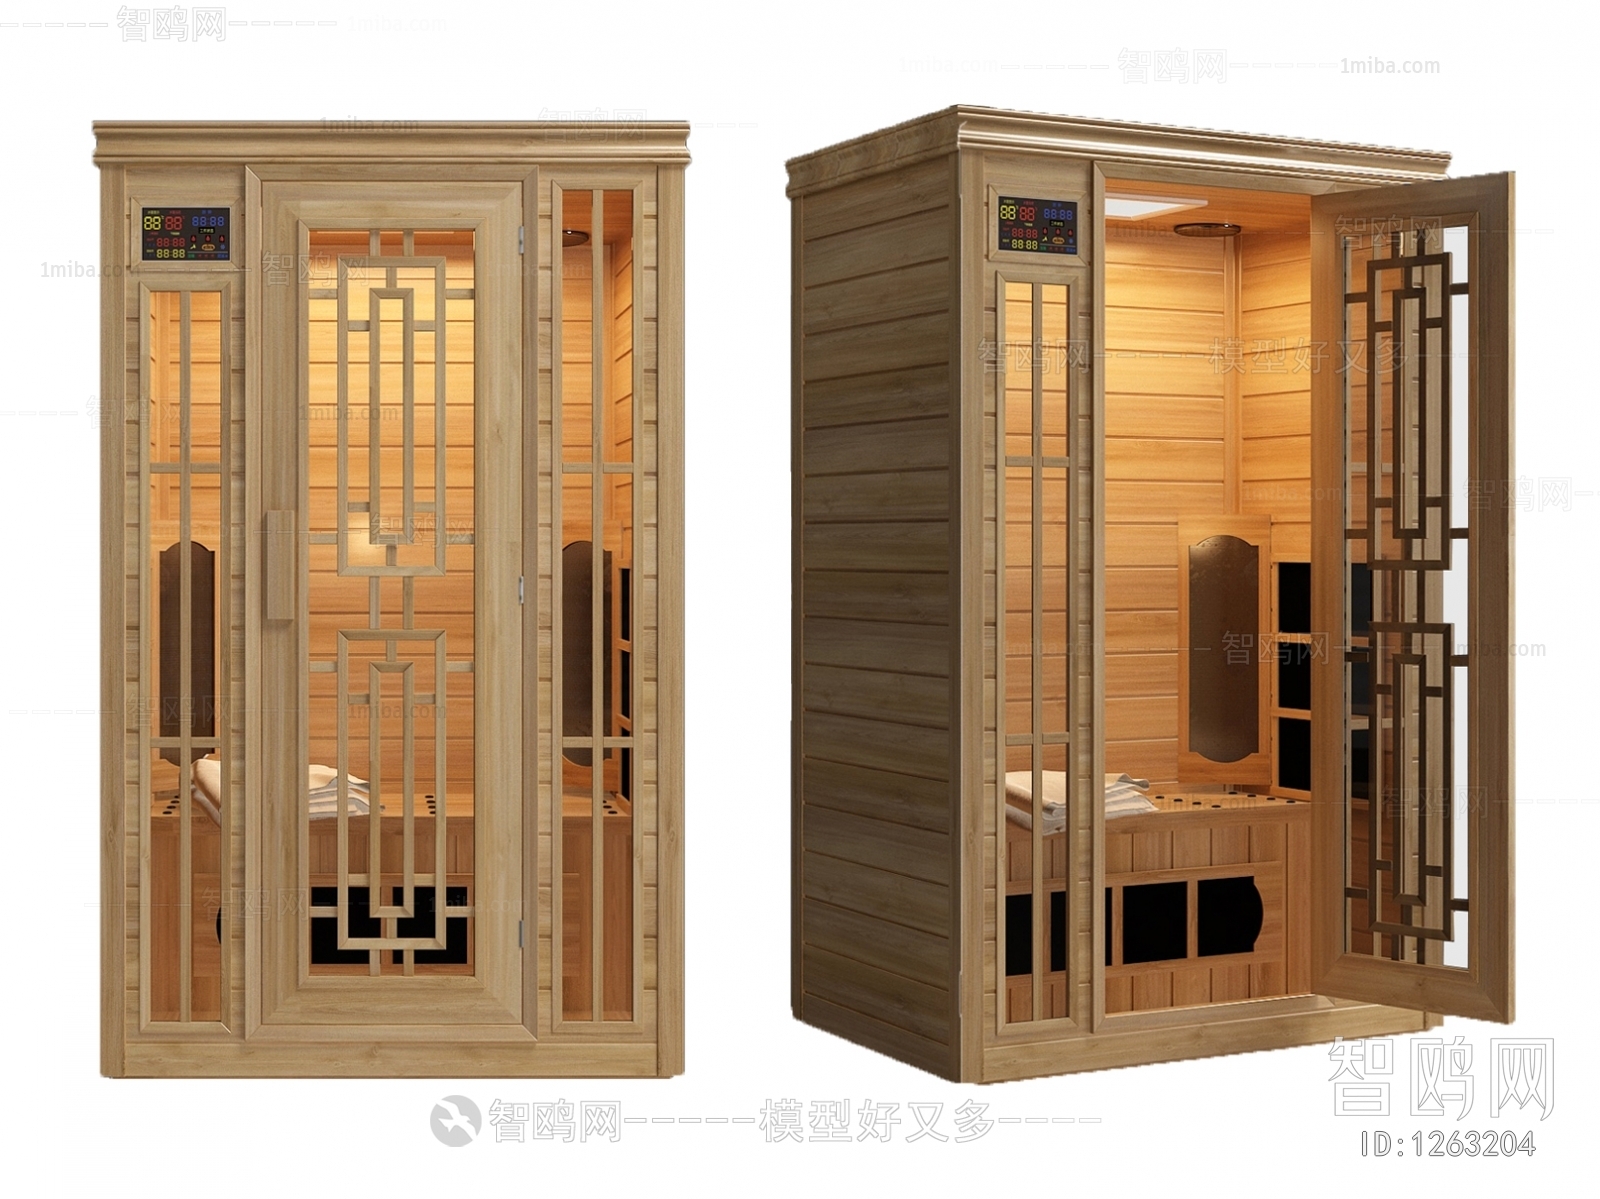 New Chinese Style Bathroom